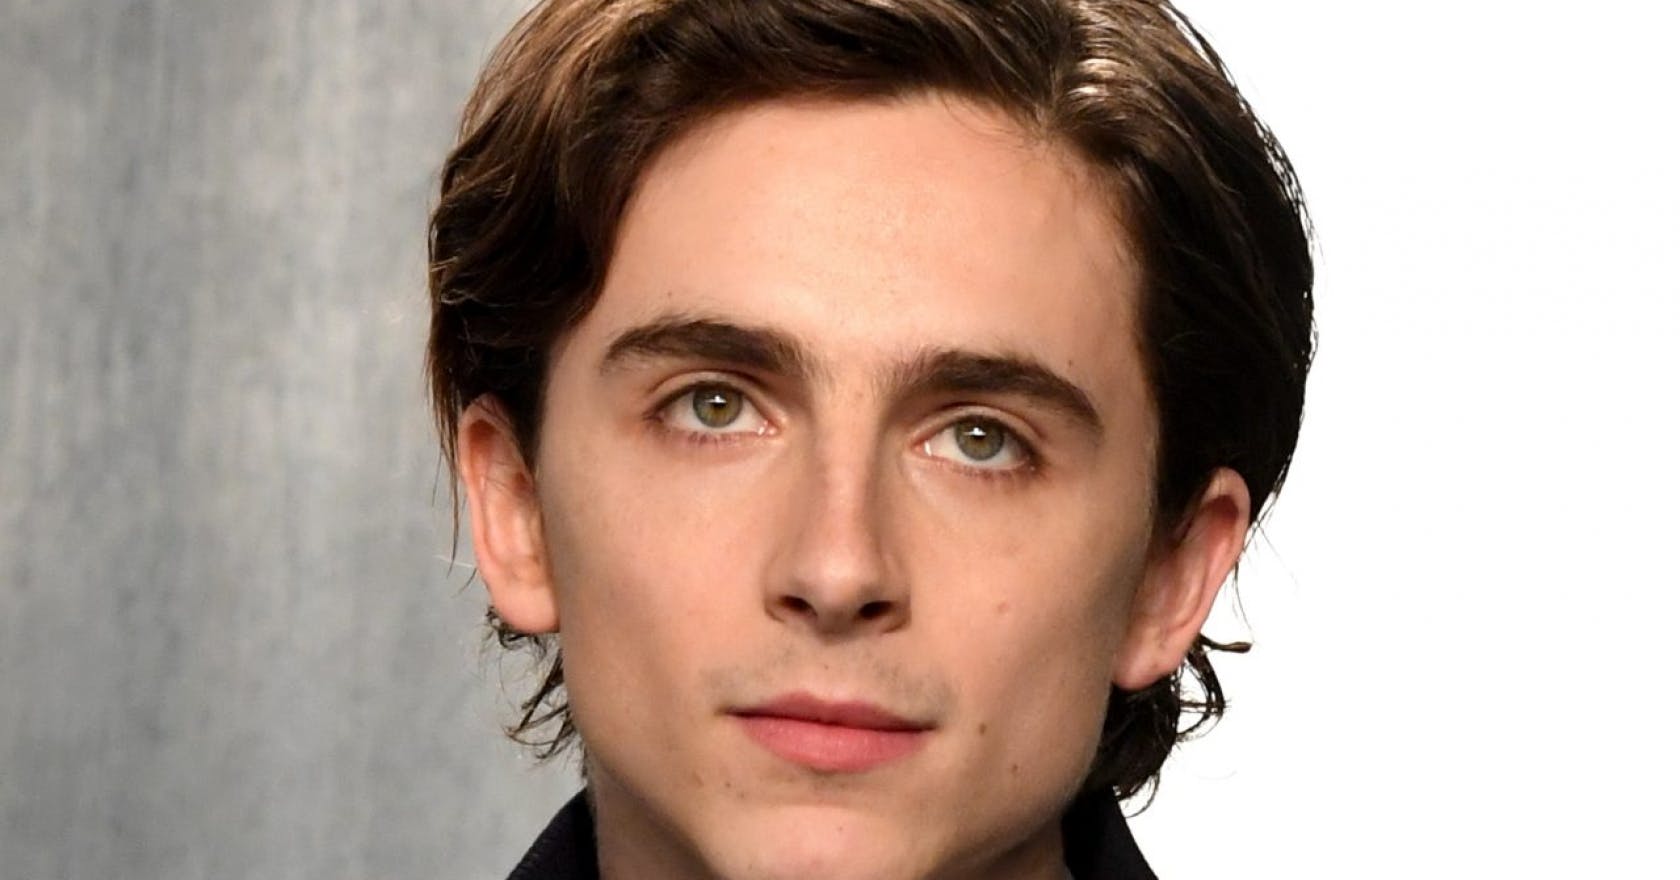 Timothée Chalamet as the new Willy Wonka? The internet reacts